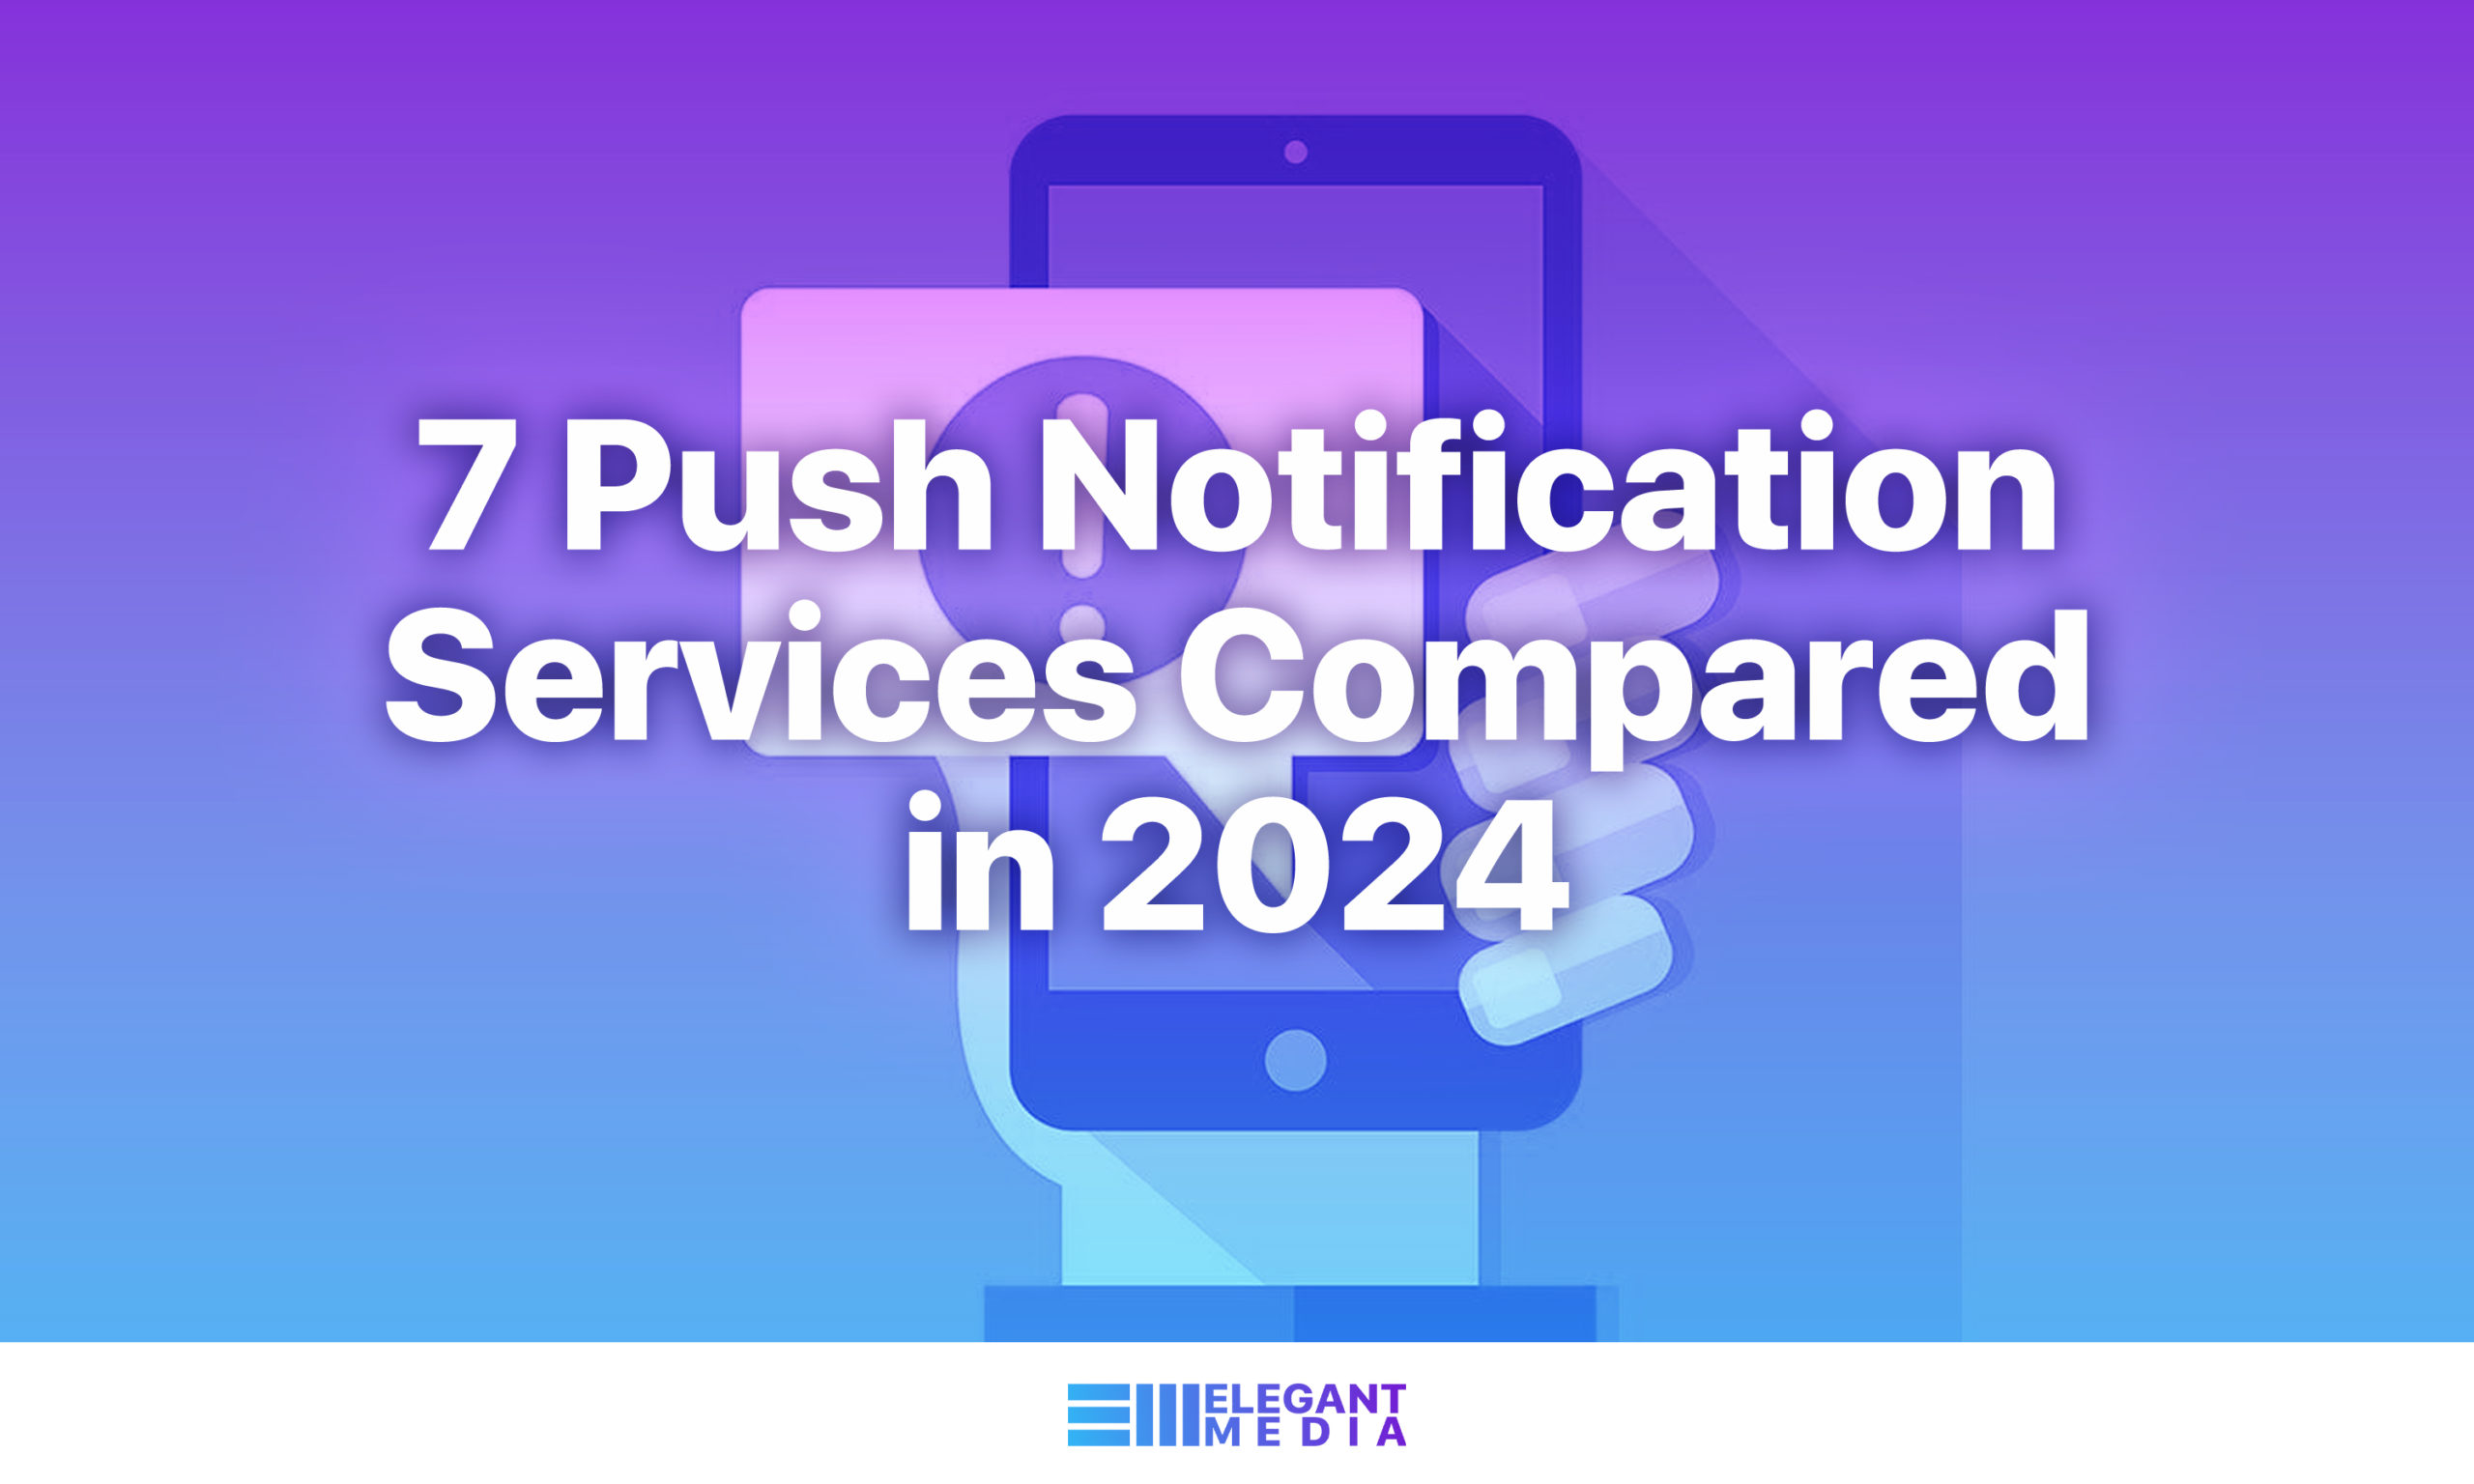 7 Push Notification Services Compared in 2024